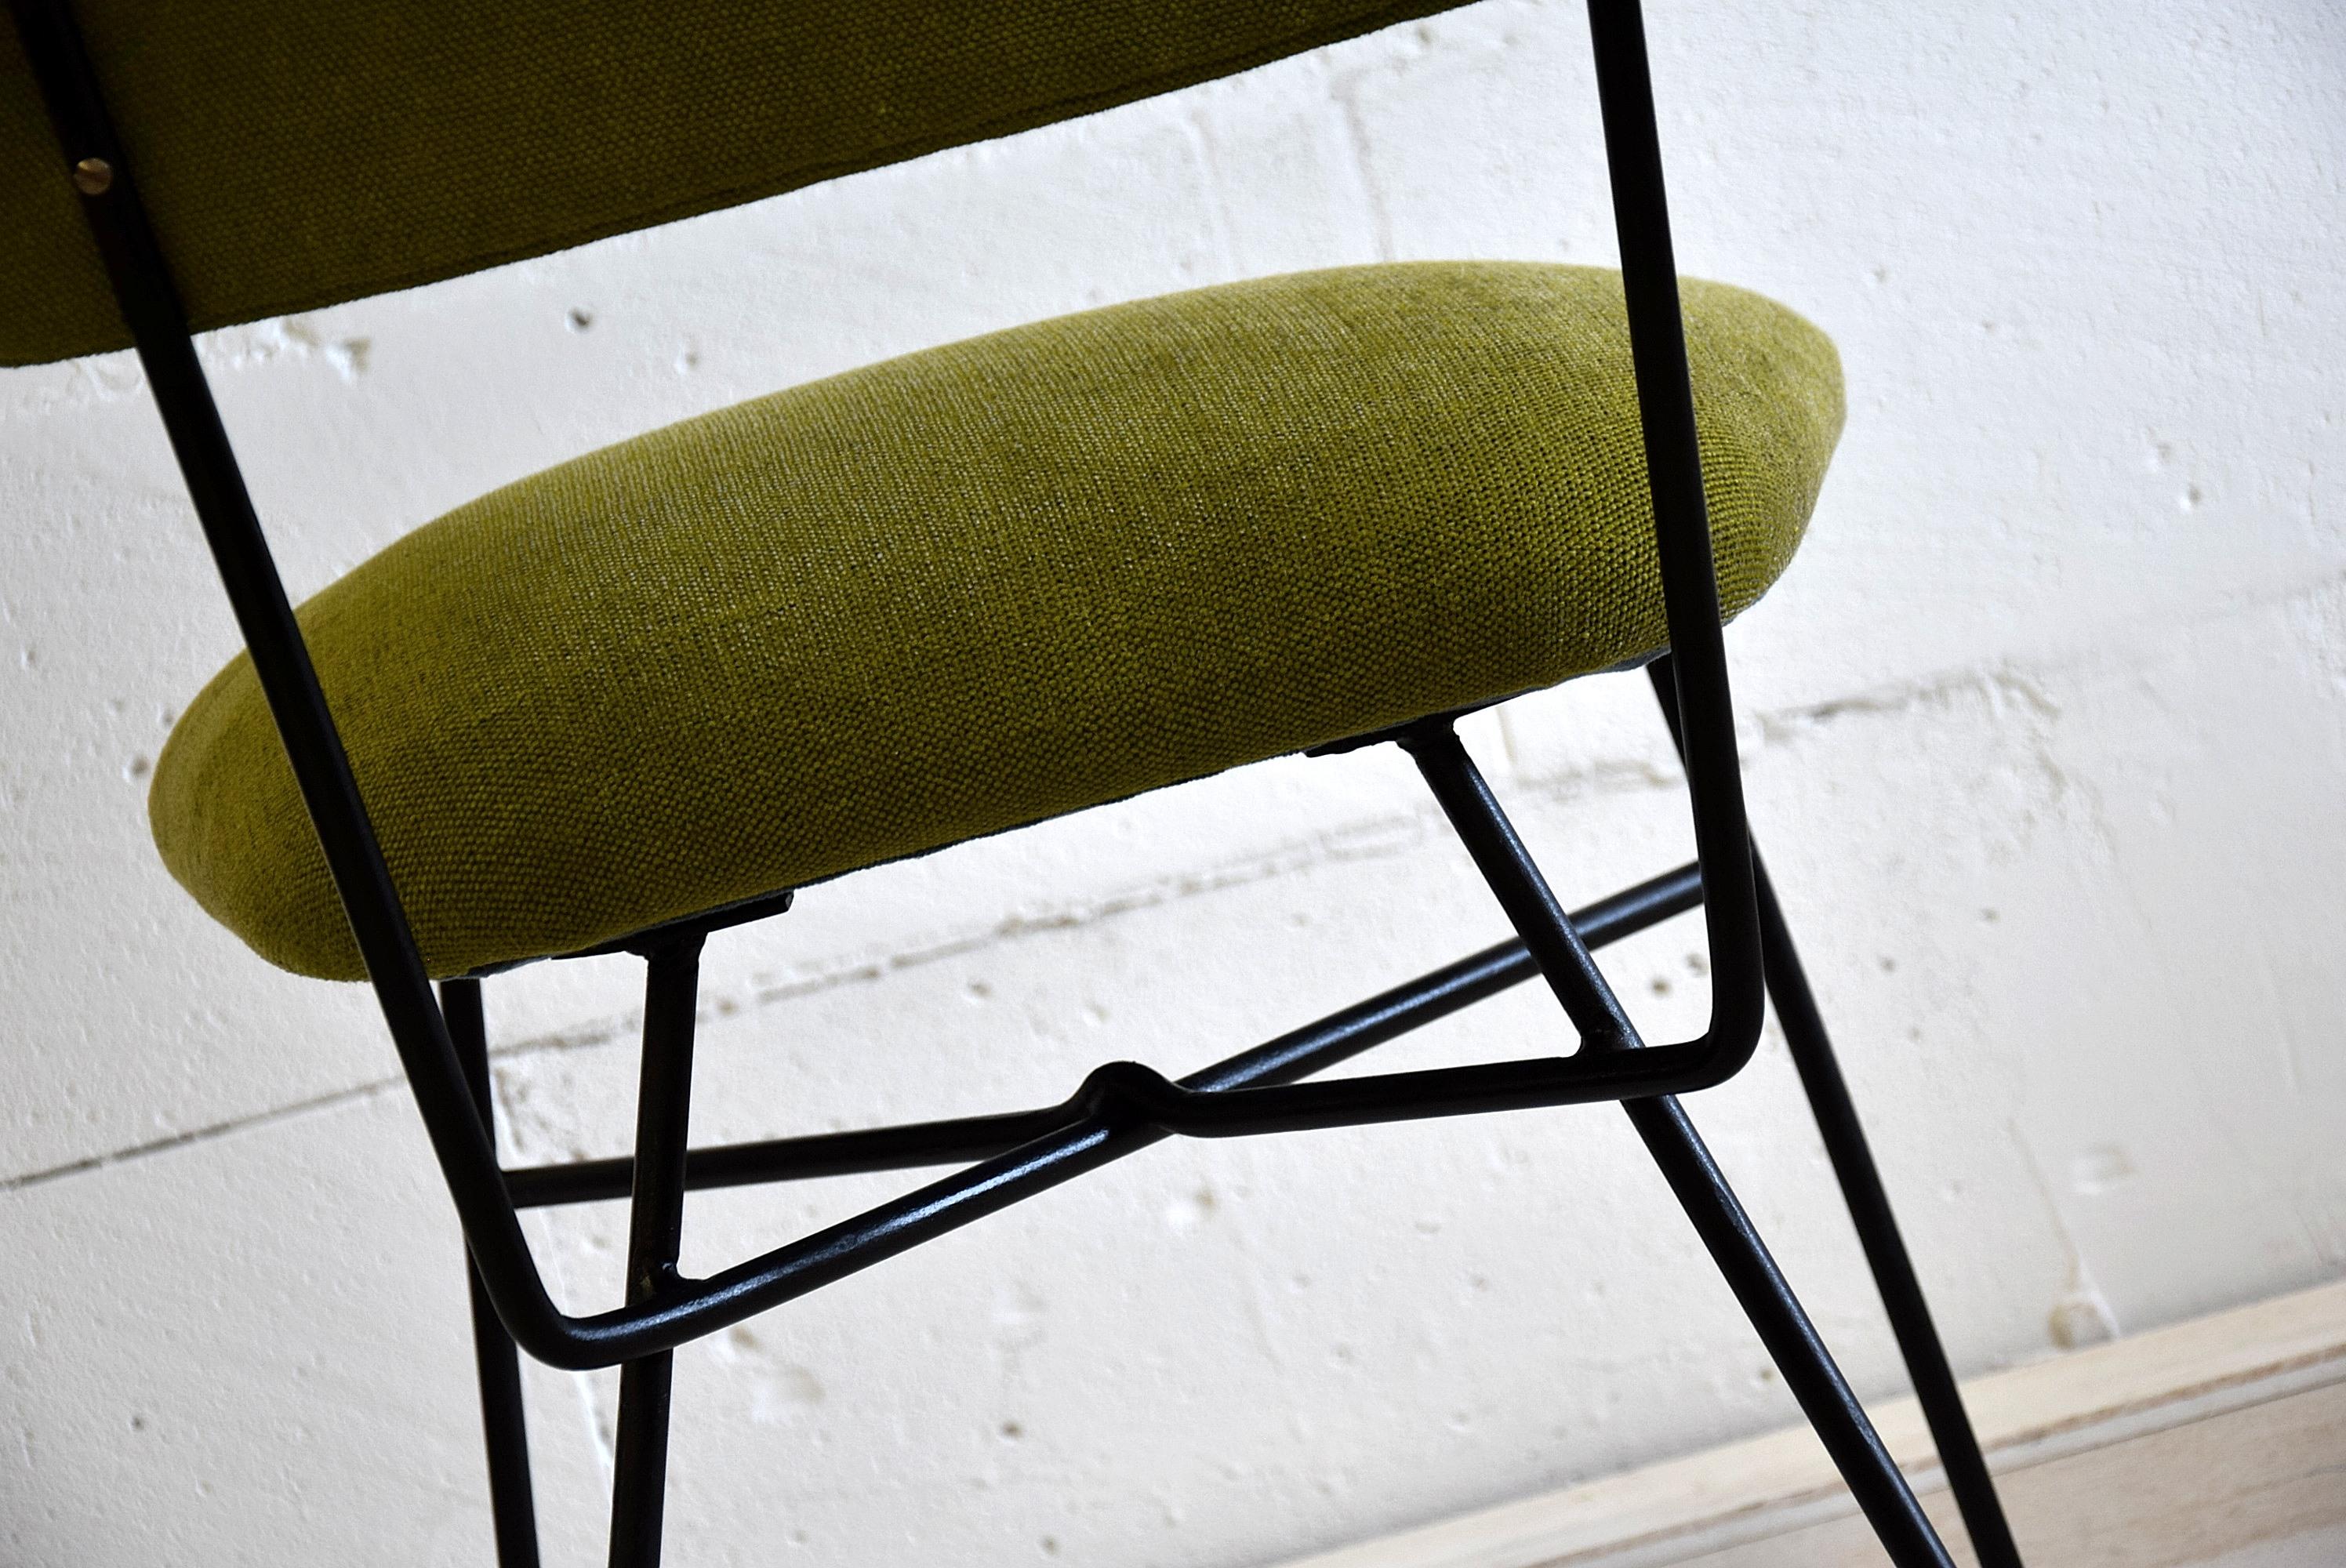 Mid century modern chair Elettra by Arflex, 1954
Elegant and stylish re-upholstered Elettra chair designed by BBPR Studio for Arflex Italy in 1954. This chair is produced circa 1955 and is in excellent condition.

Measurements: H.28.35 in. x W.18.51